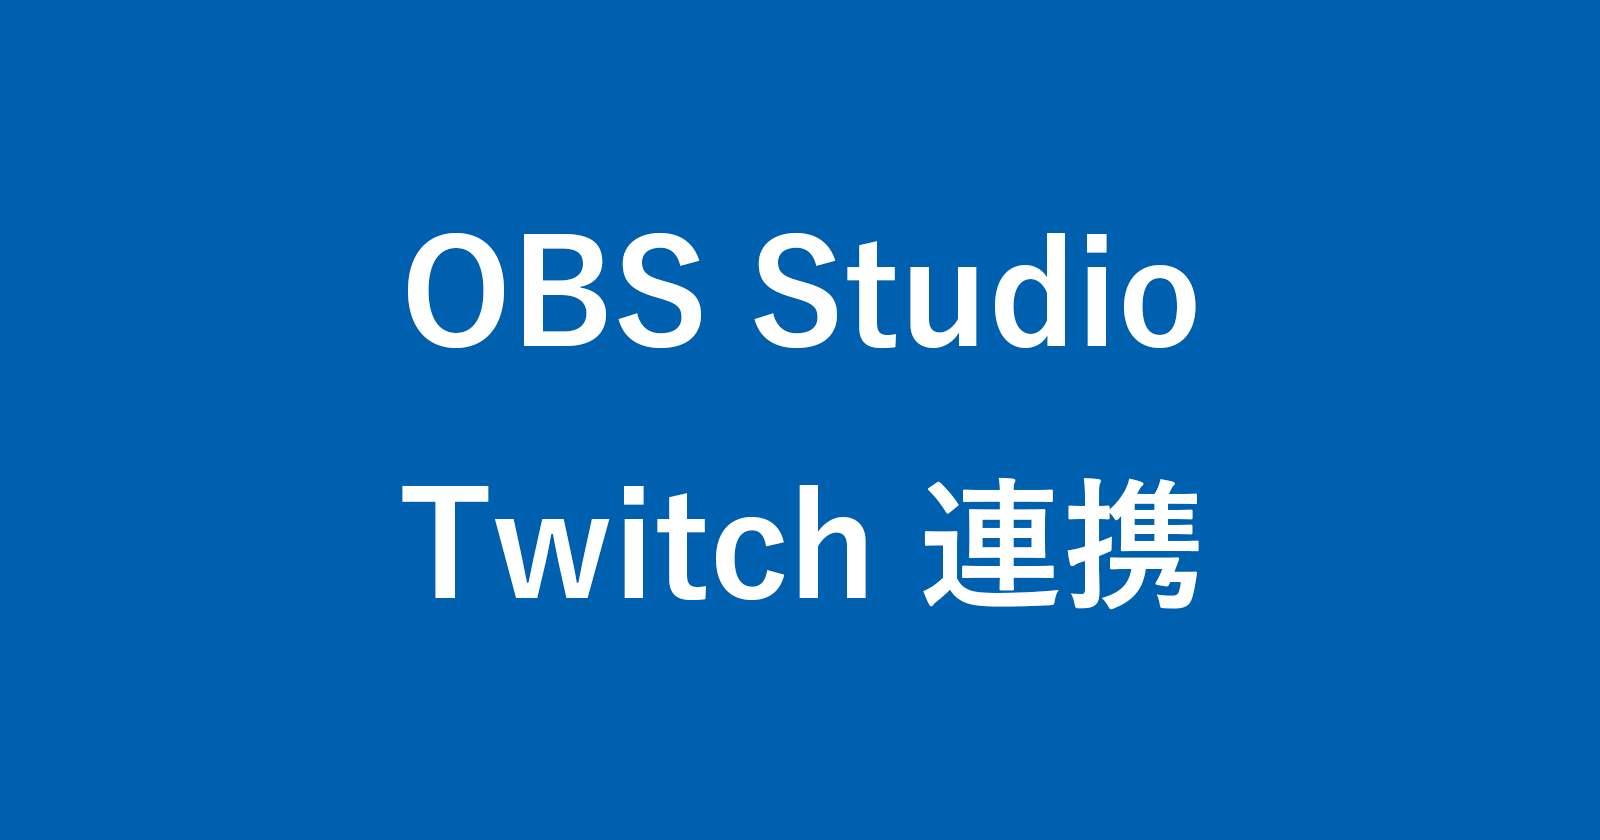 obs studio twitch connect